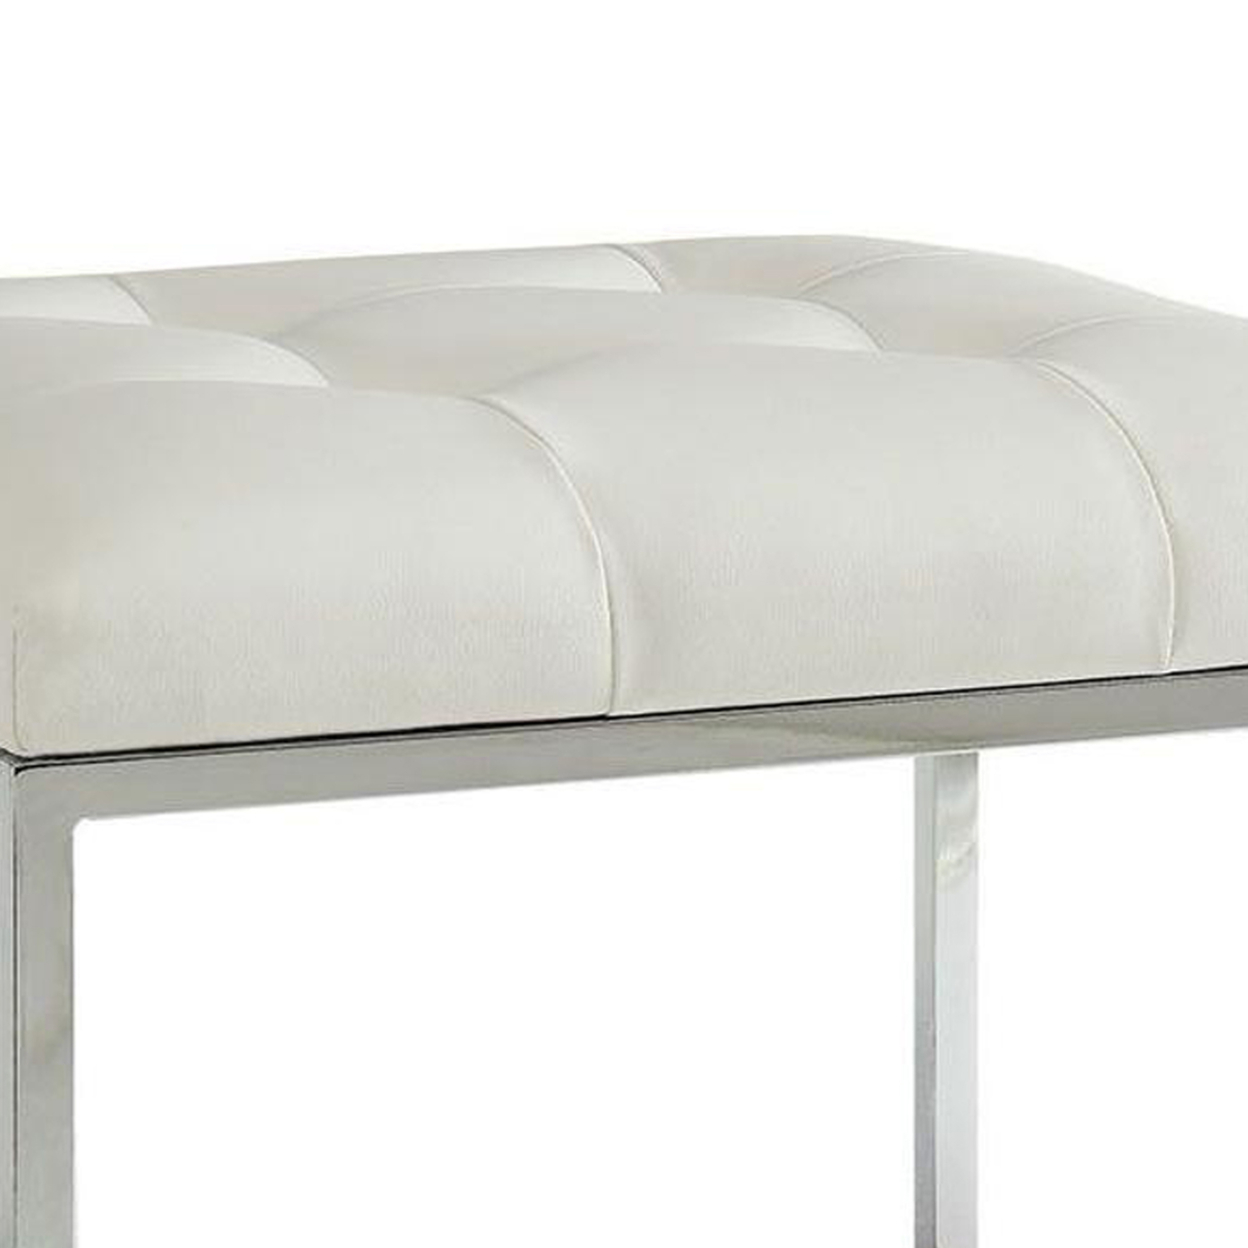 Leatherette Metal Frame Ottoman With Tufted Seating, White And Silver- Saltoro Sherpi